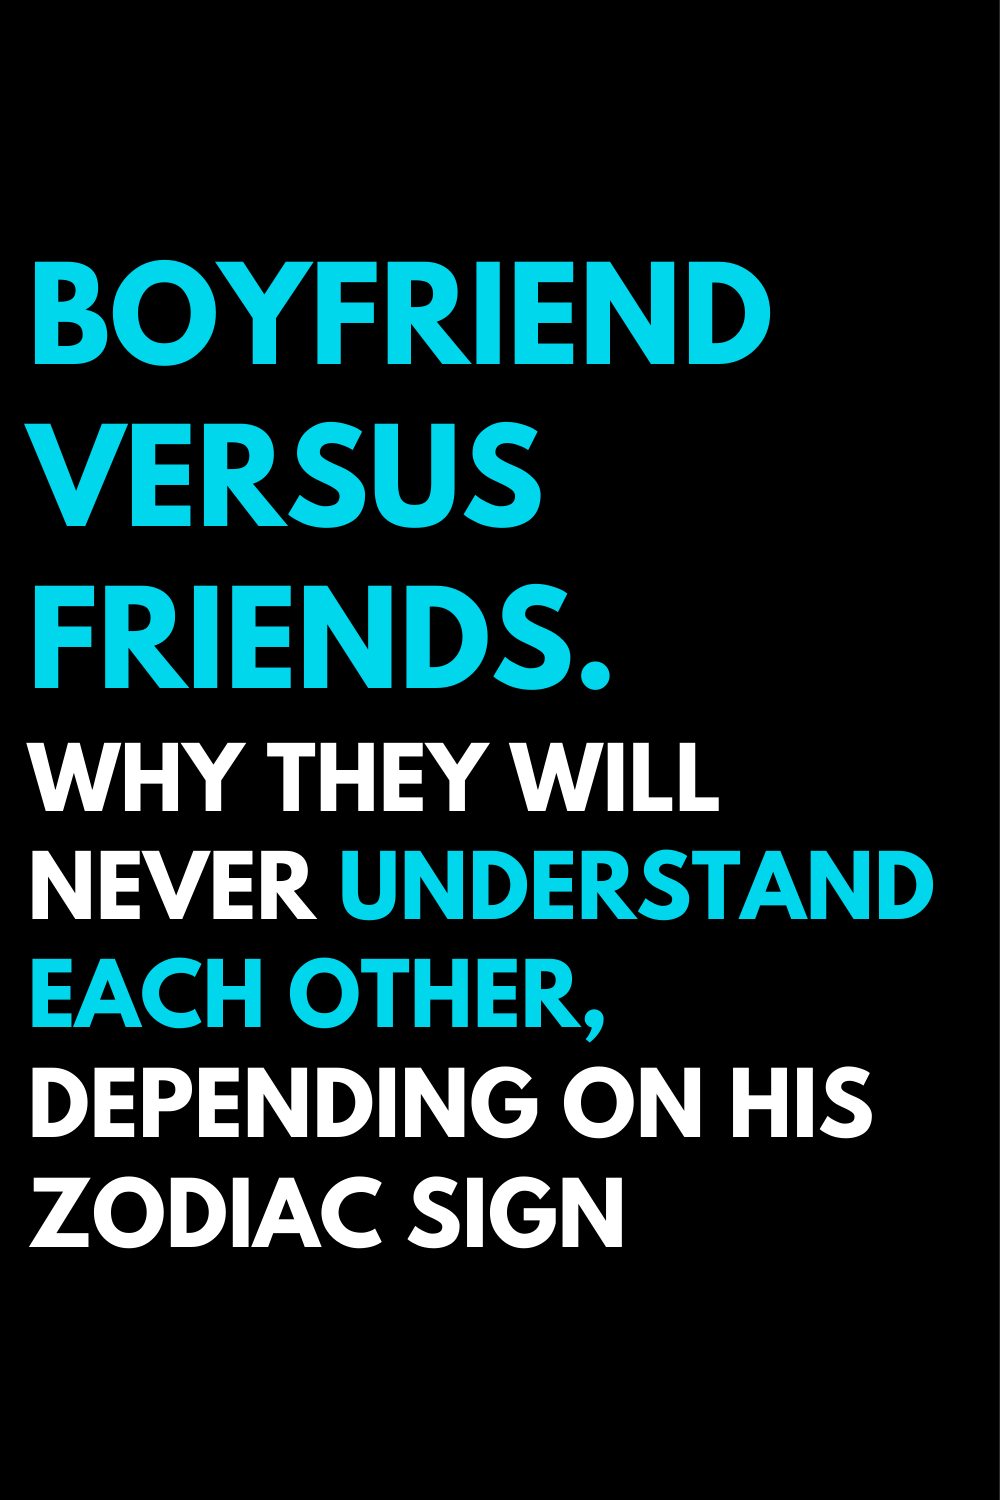 Boyfriend versus friends. Why they will never understand each other, depending on his zodiac sign